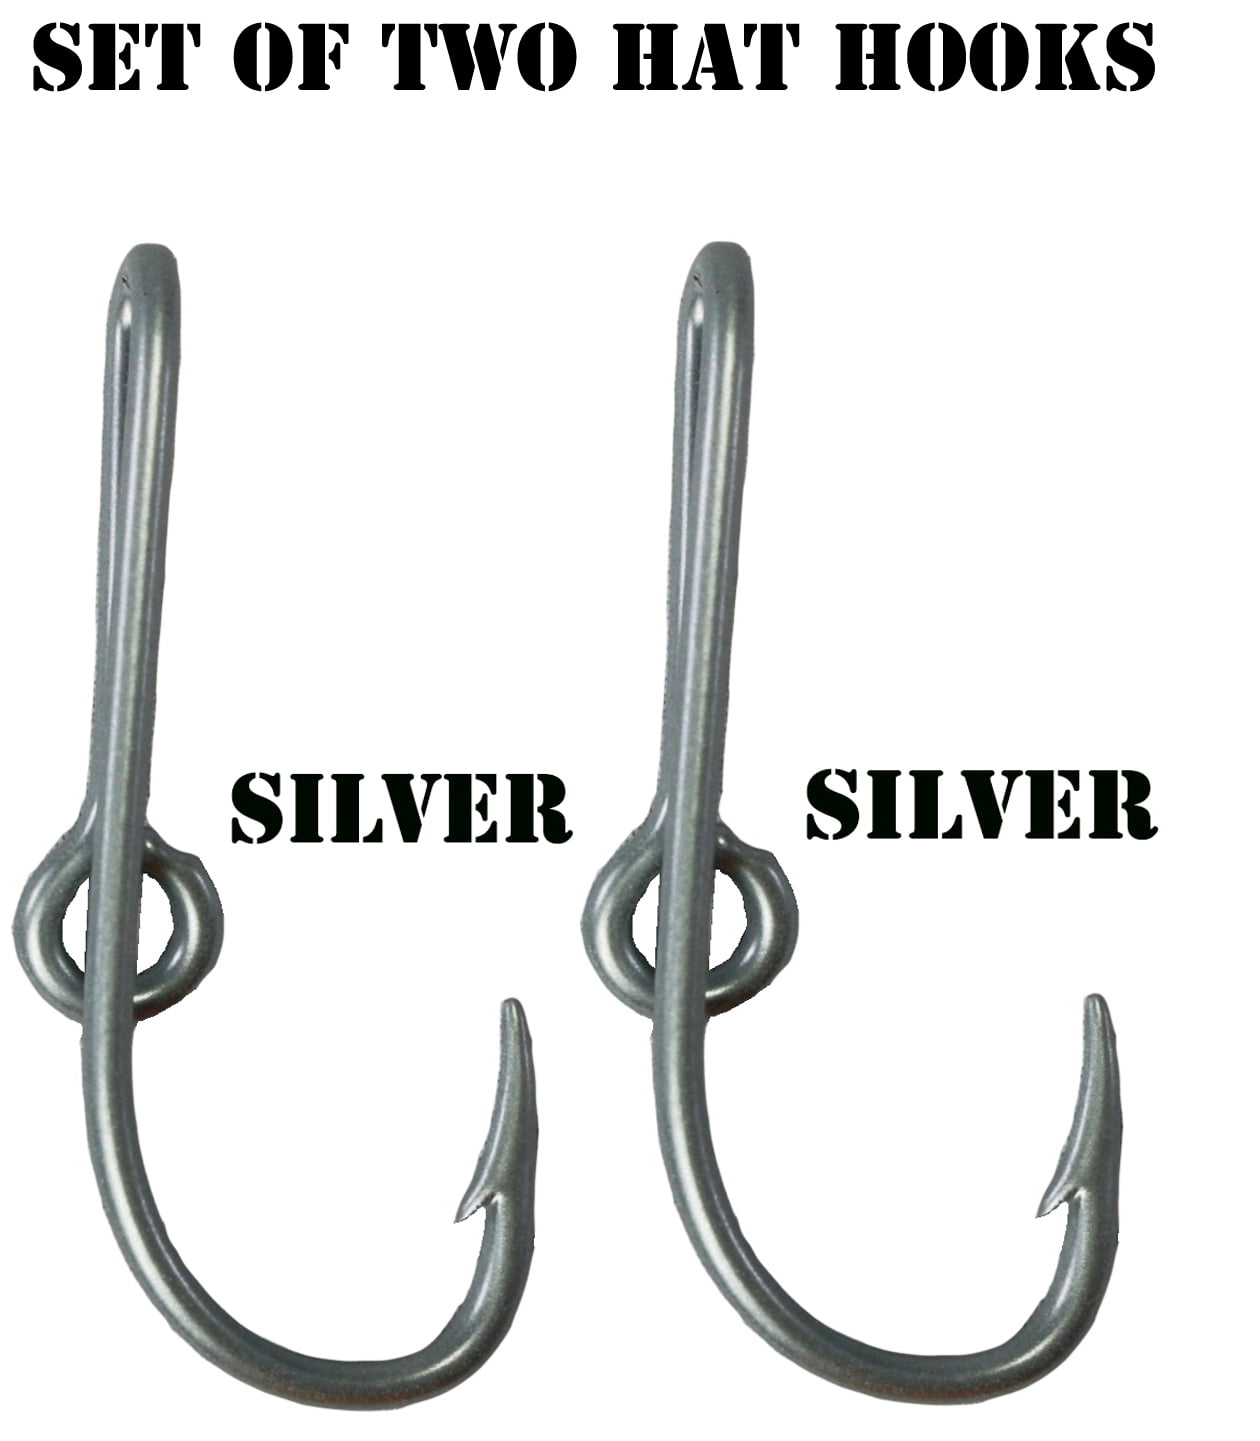 Details about  / Professional Stainless Steel Feather Fishing Hooks Barbed Bass Boat Fishhook 10*